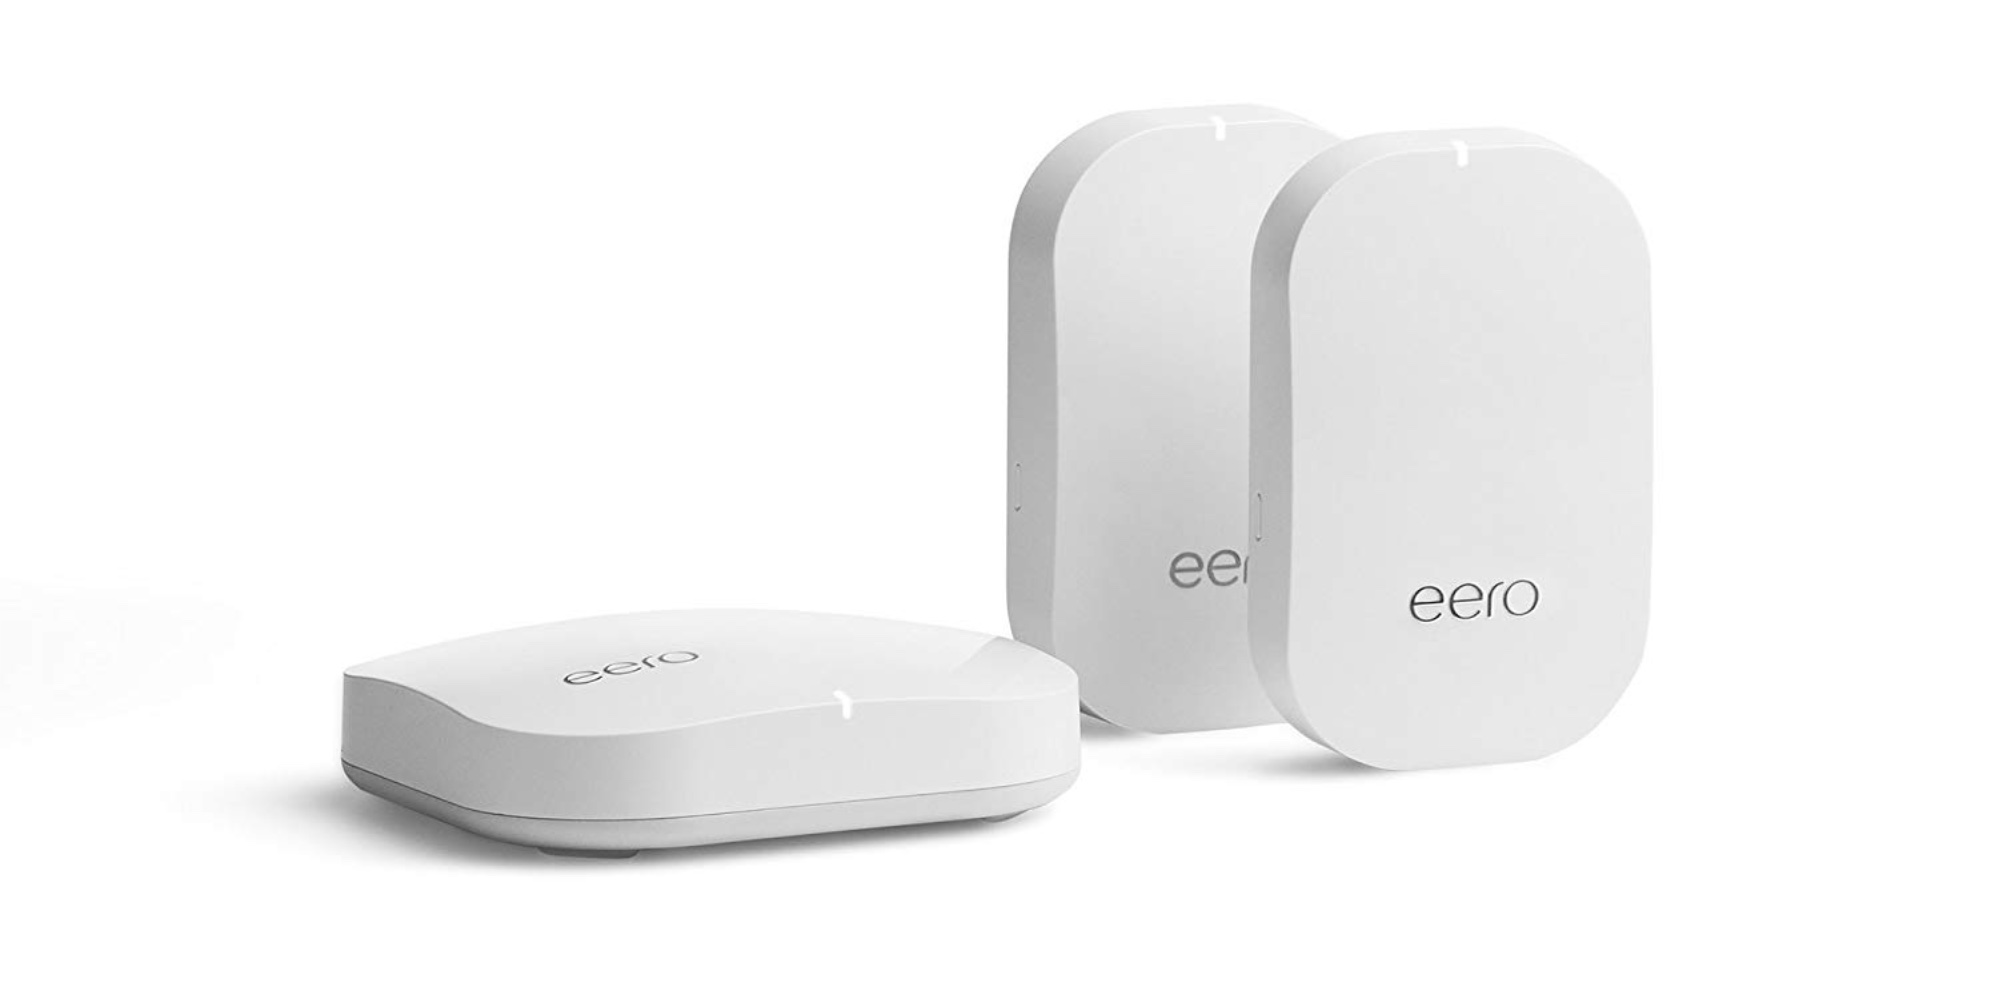 puts an eero router new home